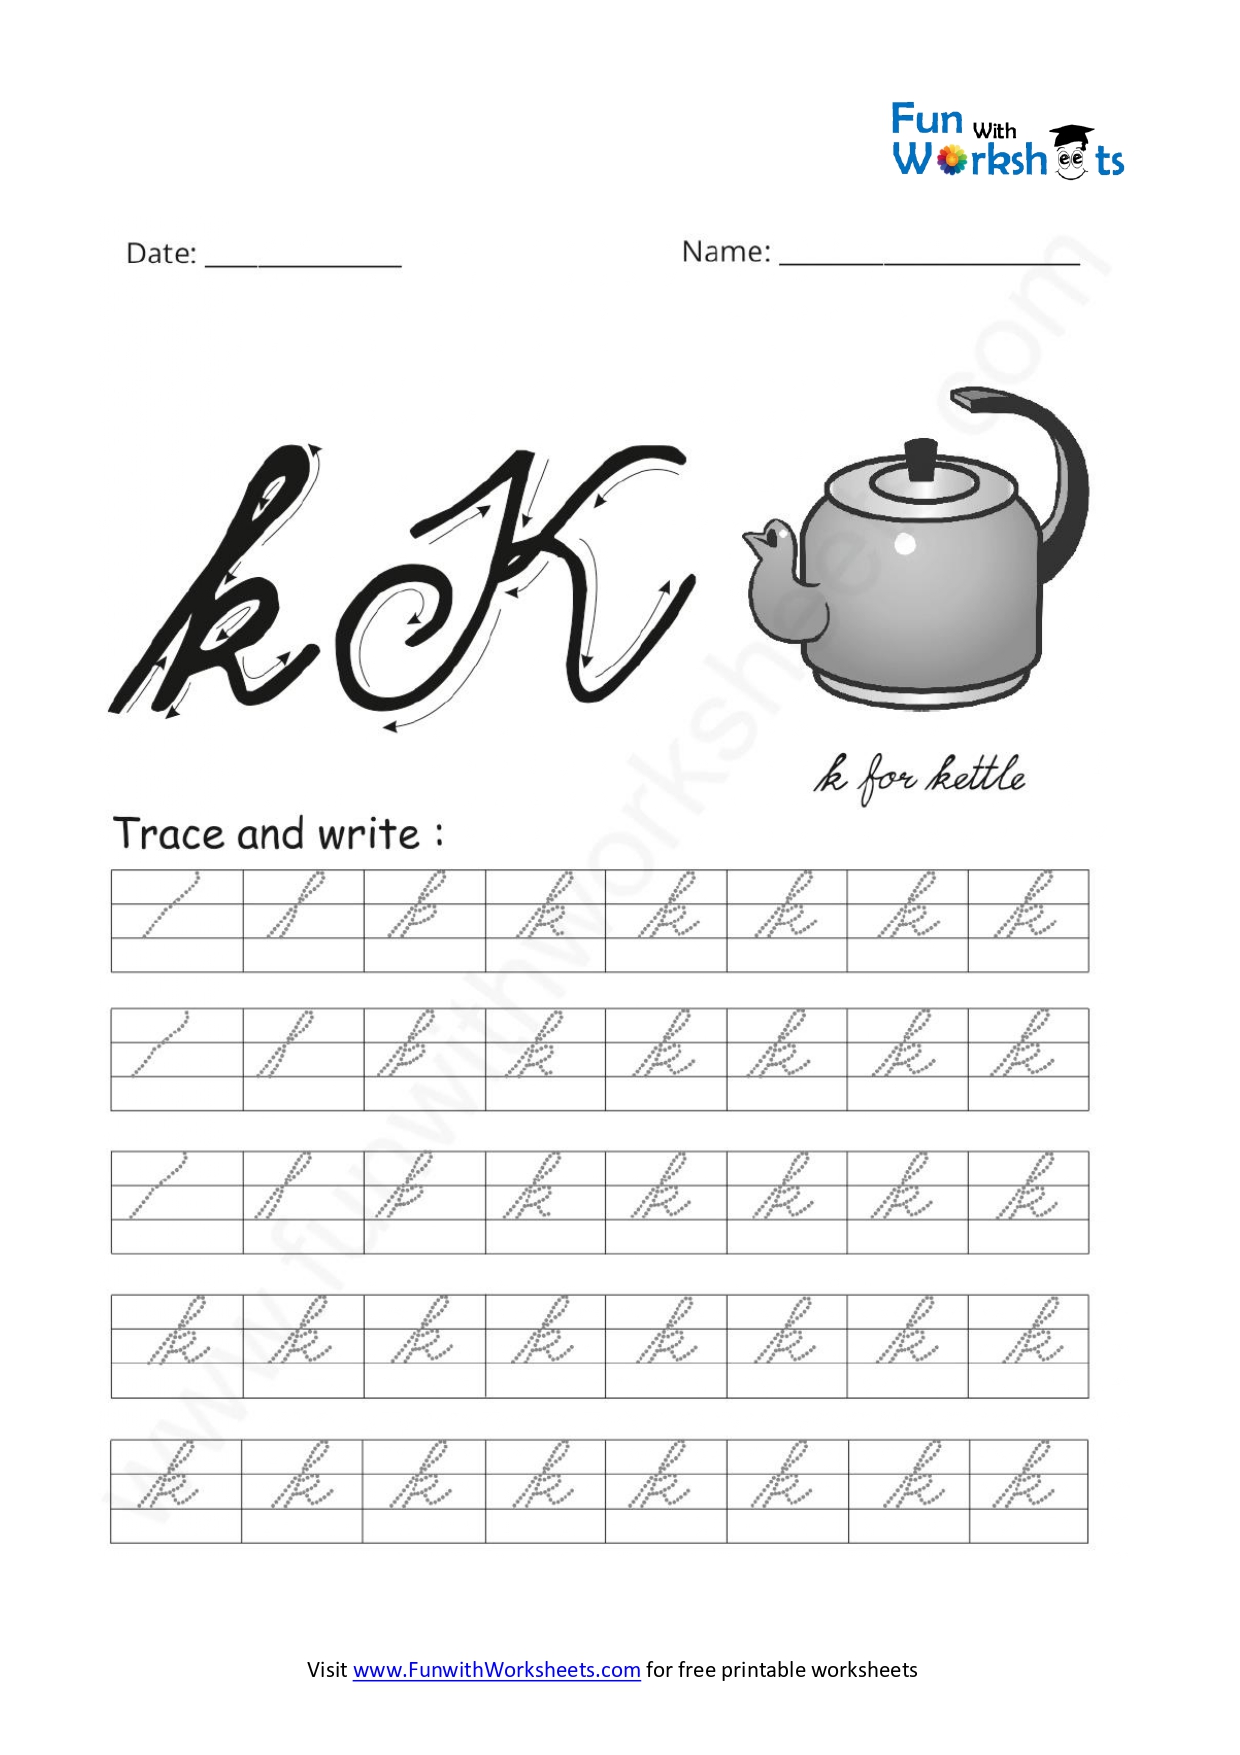 Free Printable Worksheets -Cursive Small letters Archives - Page 2 of 3 ...